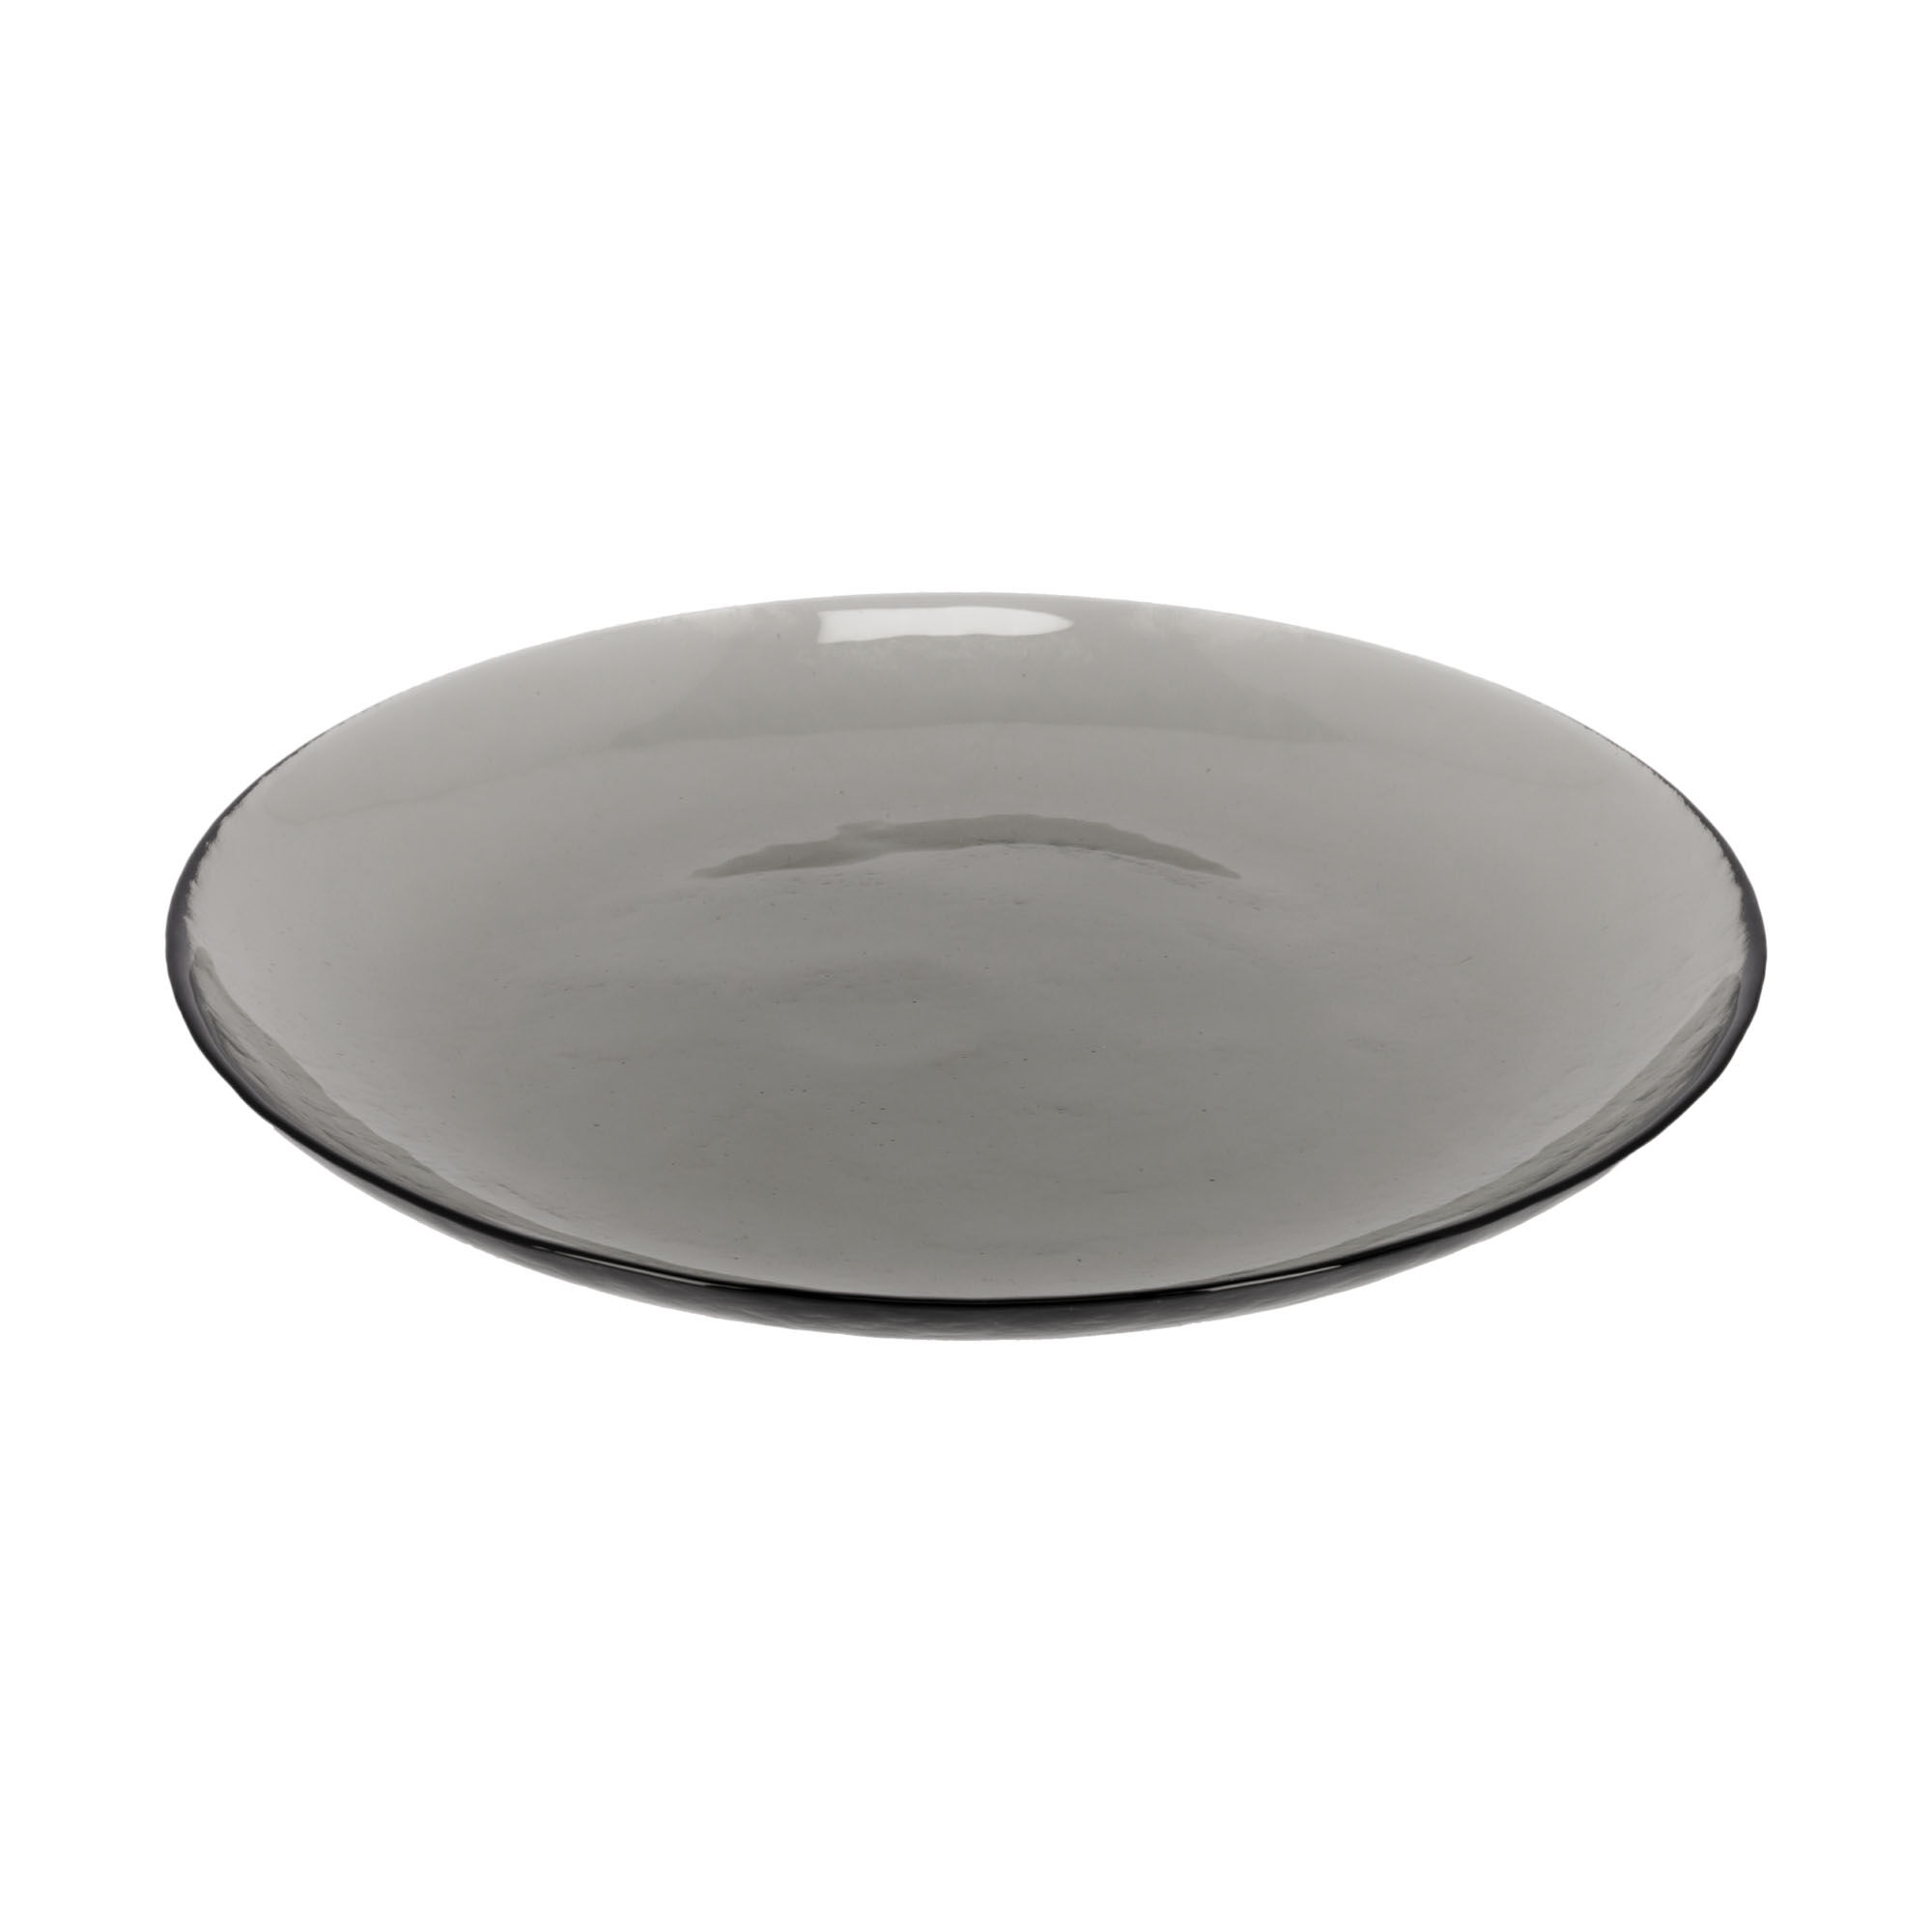 Kave Home Syna plate